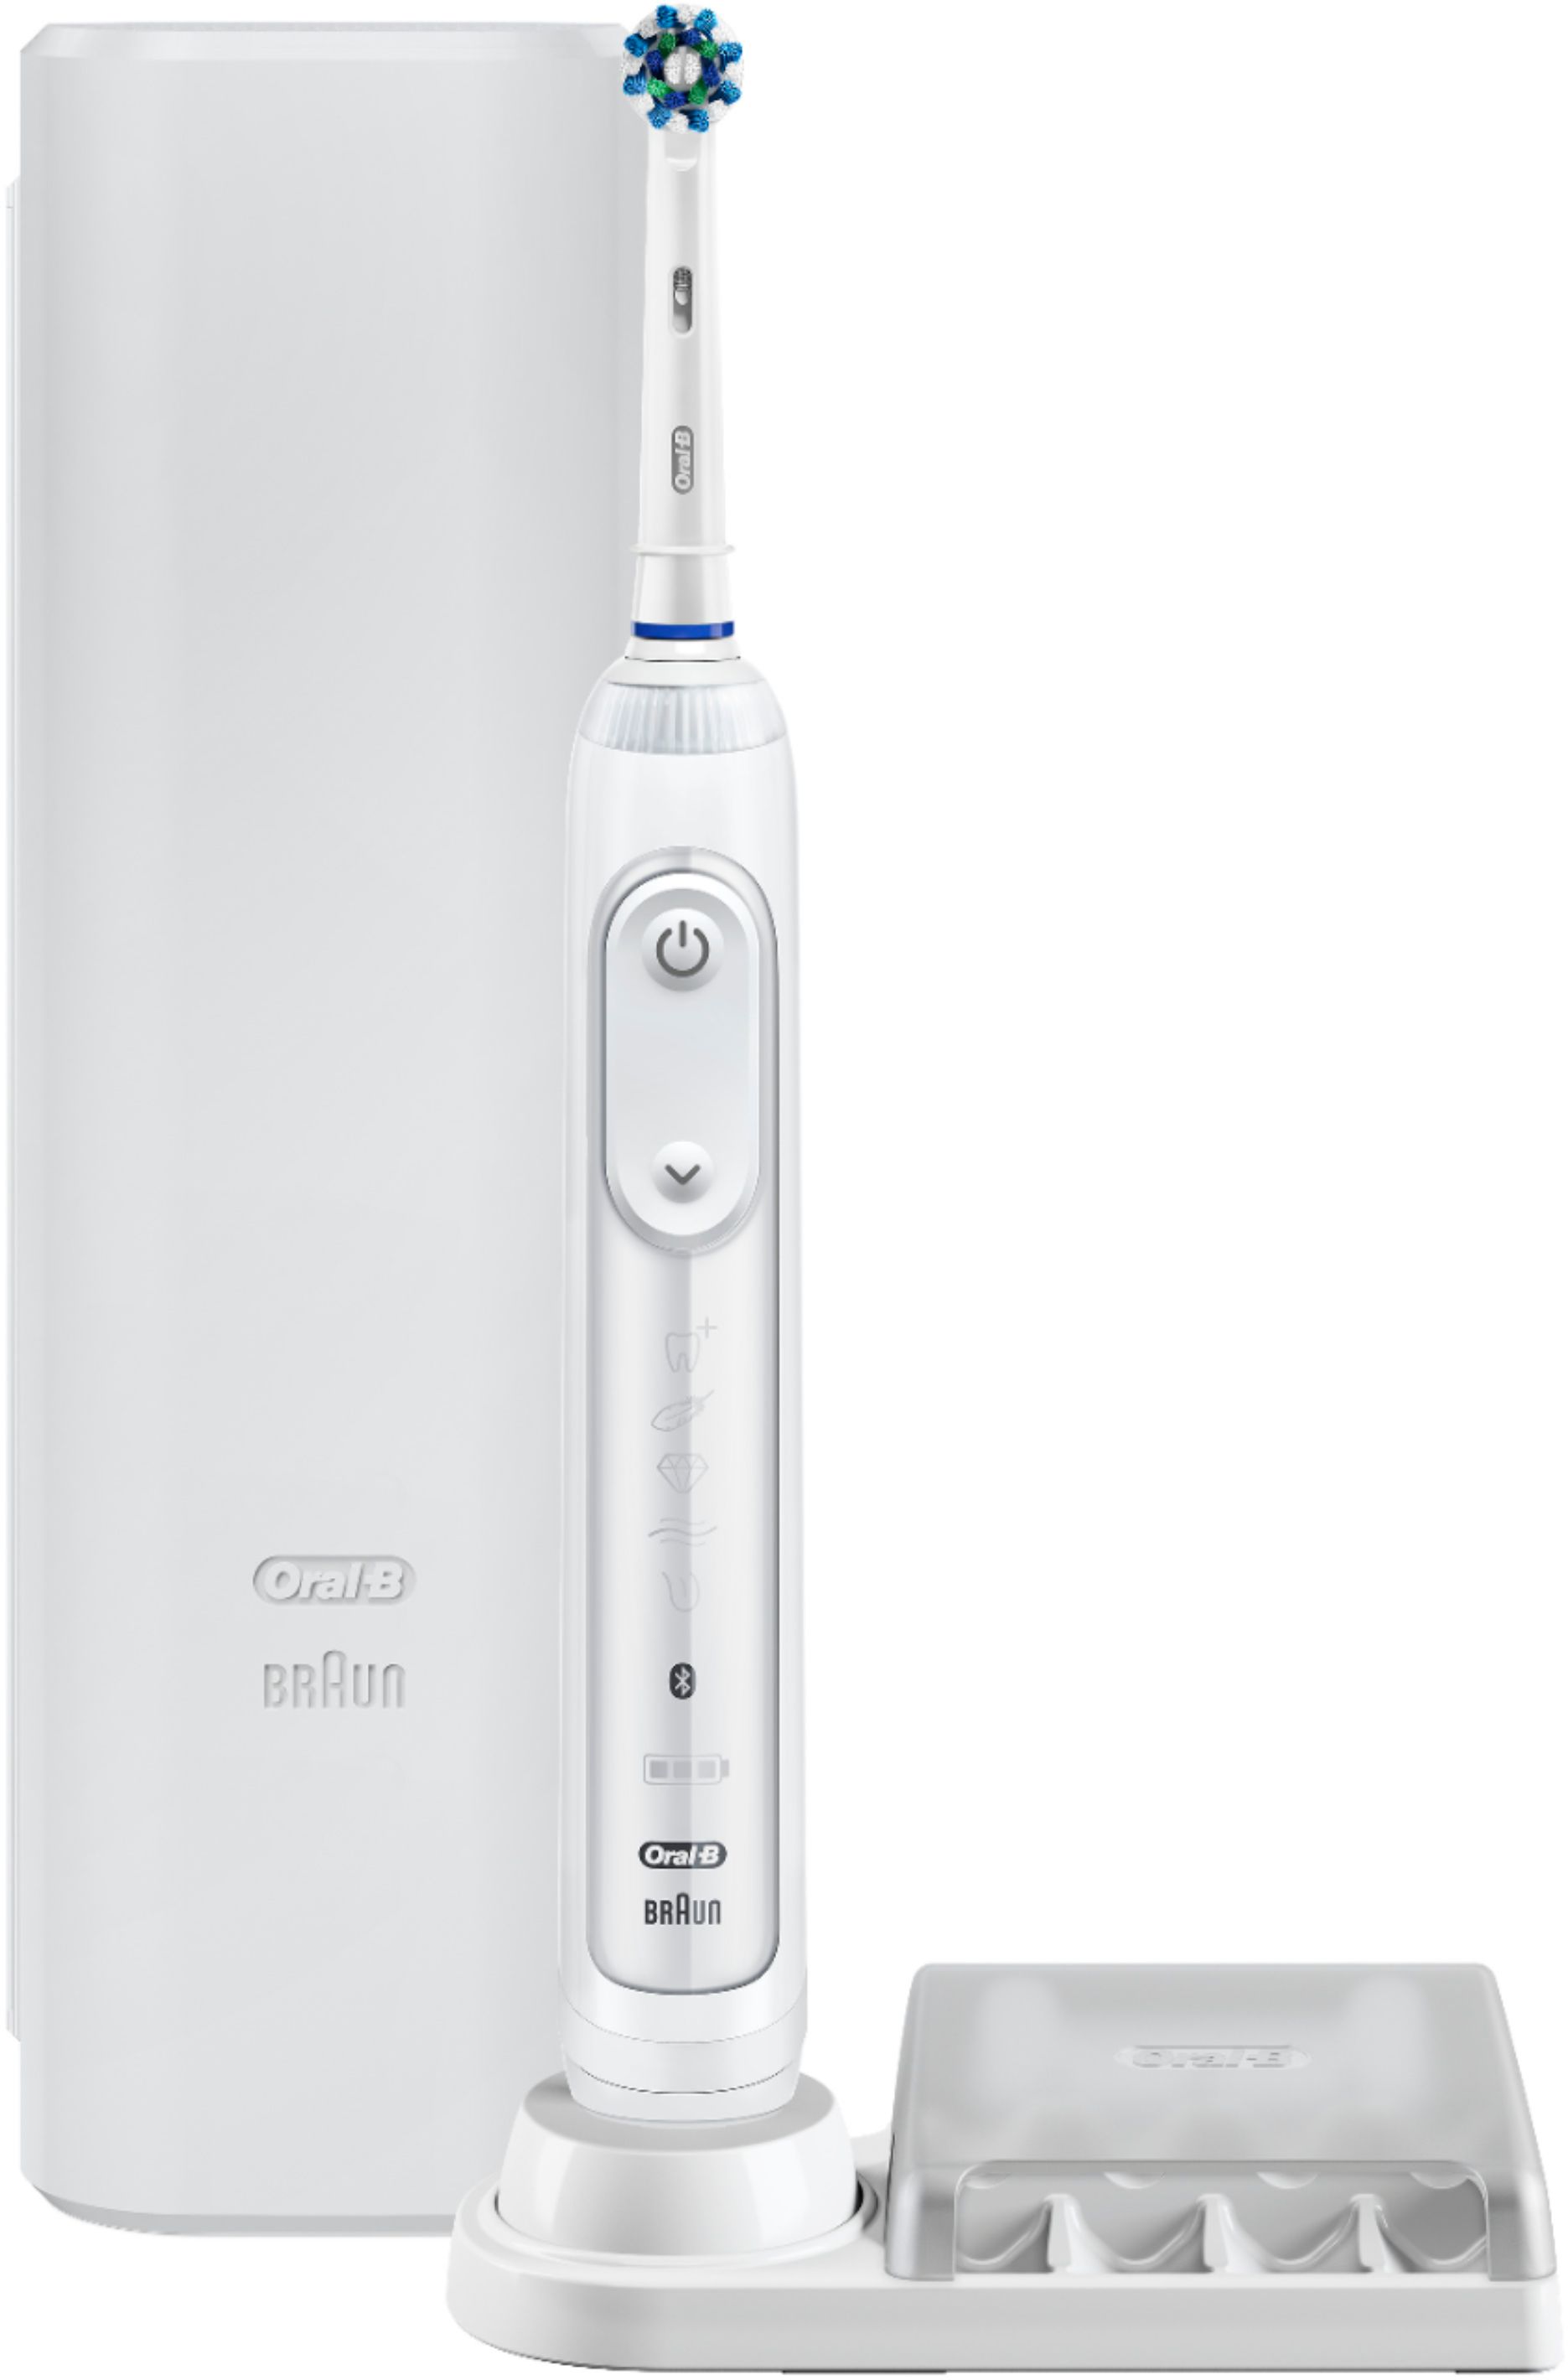 Angle View: Oral-B - Genius 6000 Electric Toothbrush, Powered by Braun - White